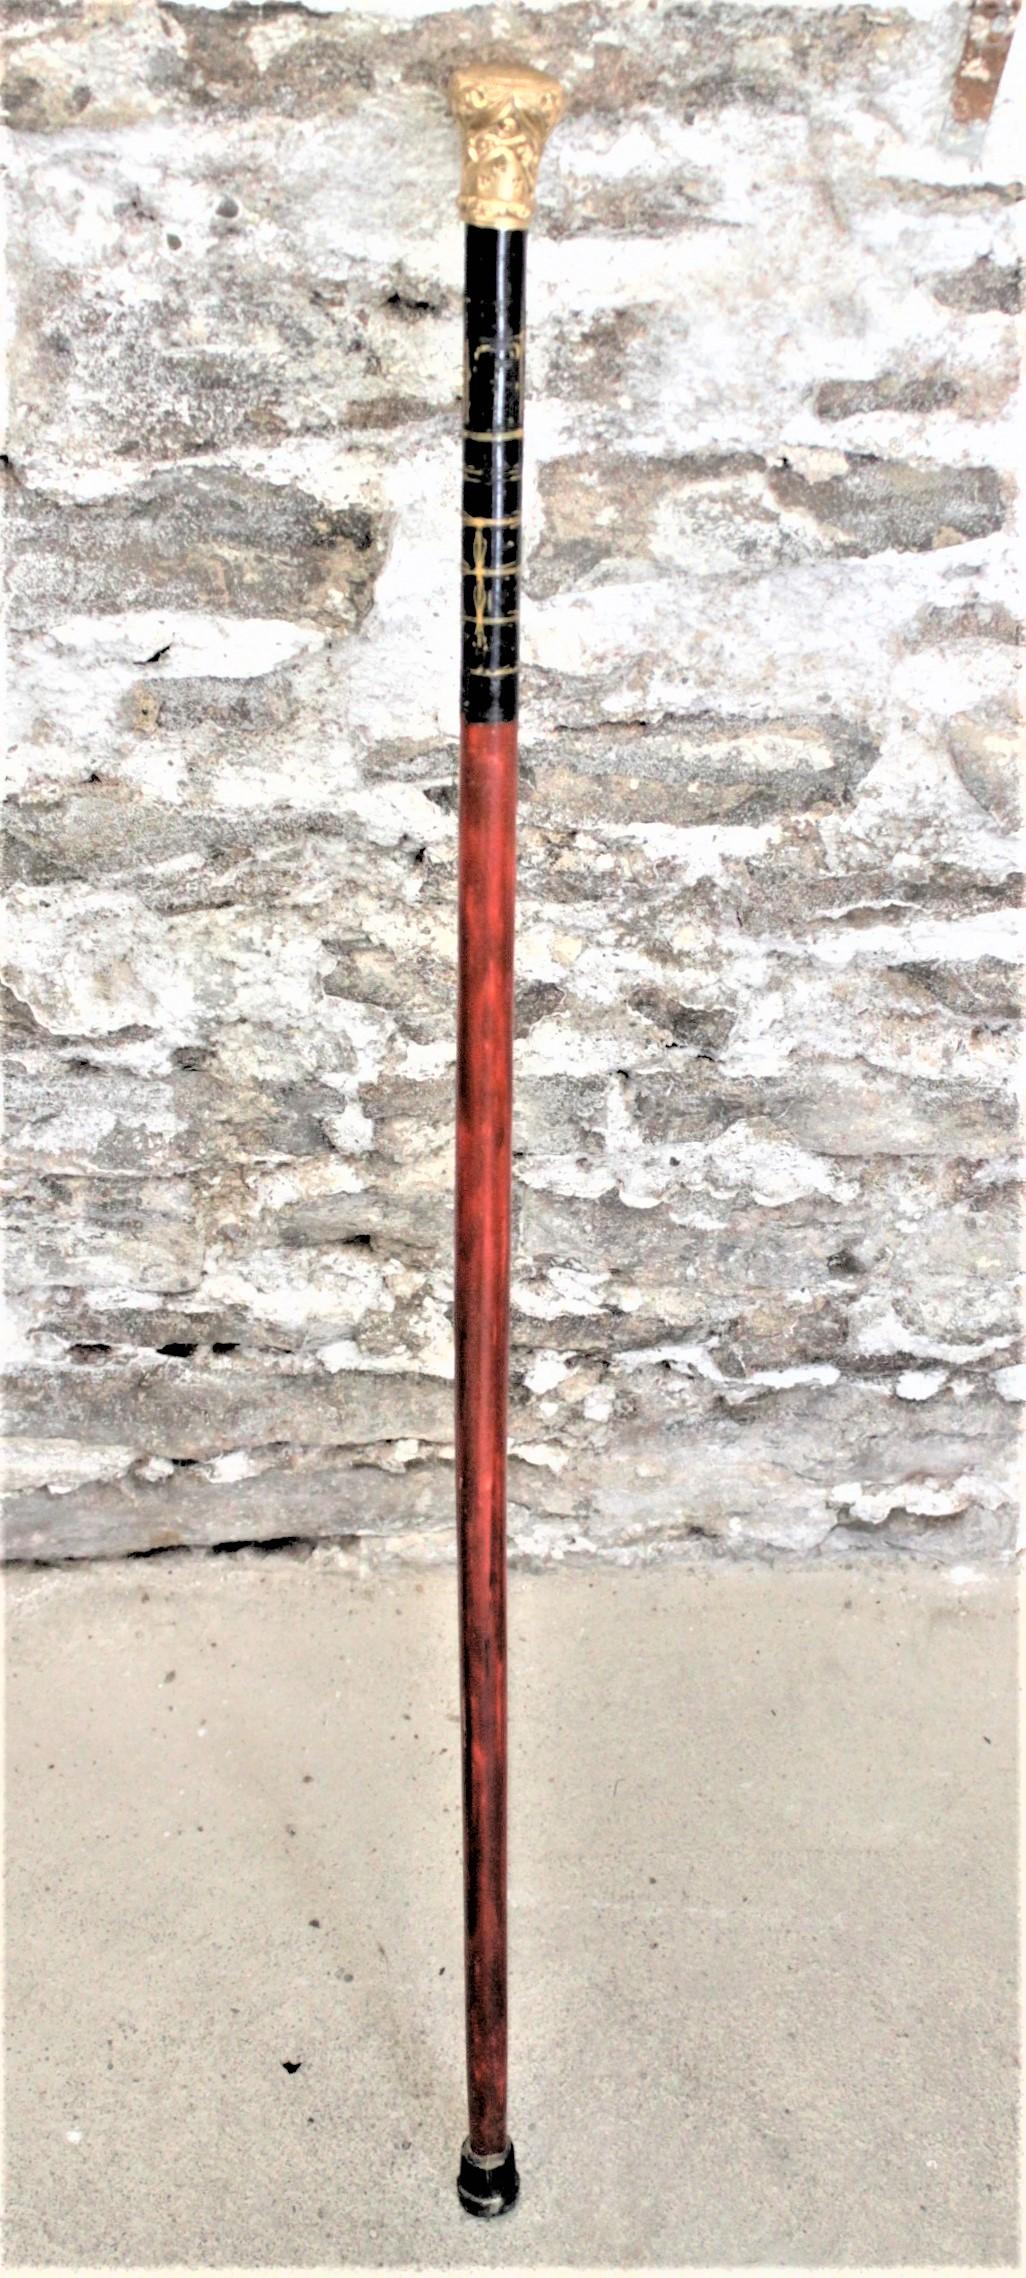 This antique gold-filled and handcrafted presentation walking stick is hallmarked for presumably an English maker and believed to have been made in circa 1910 in the period Edwardian style. The walking stick's handle is clearly engraved that it was